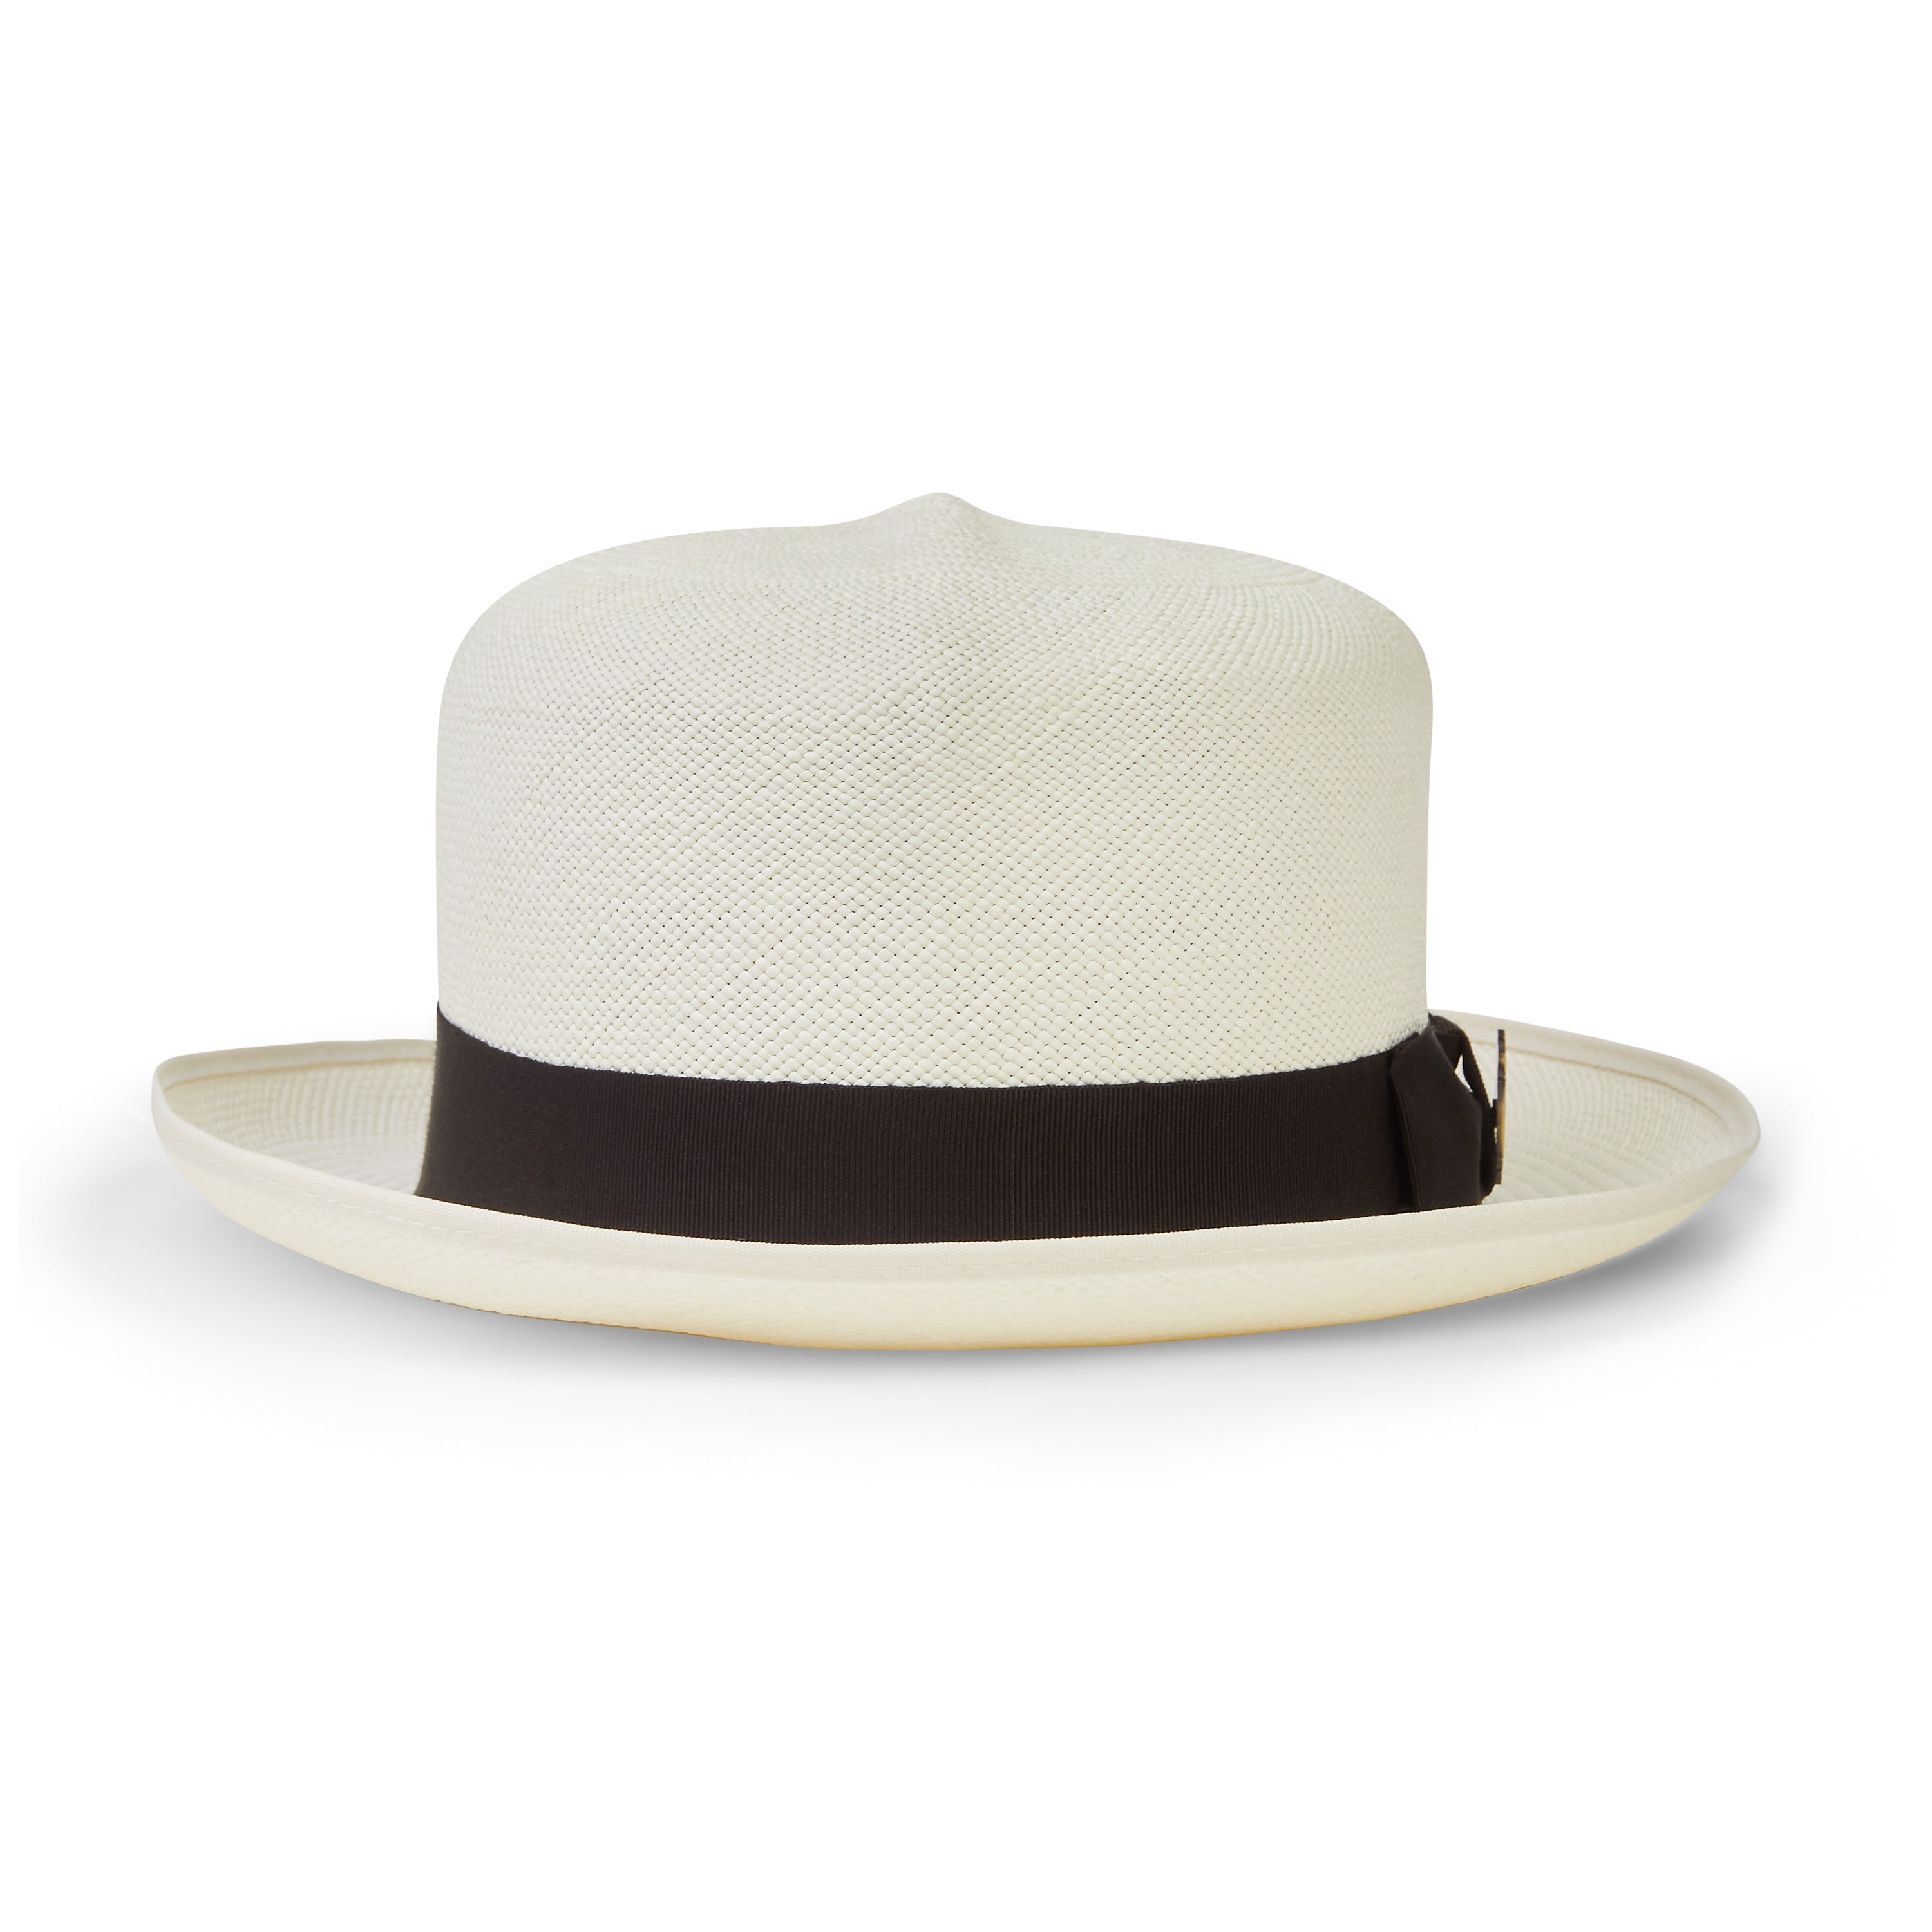 Christy's Hats Classic Preset Panama Hat - Black Band Bleached